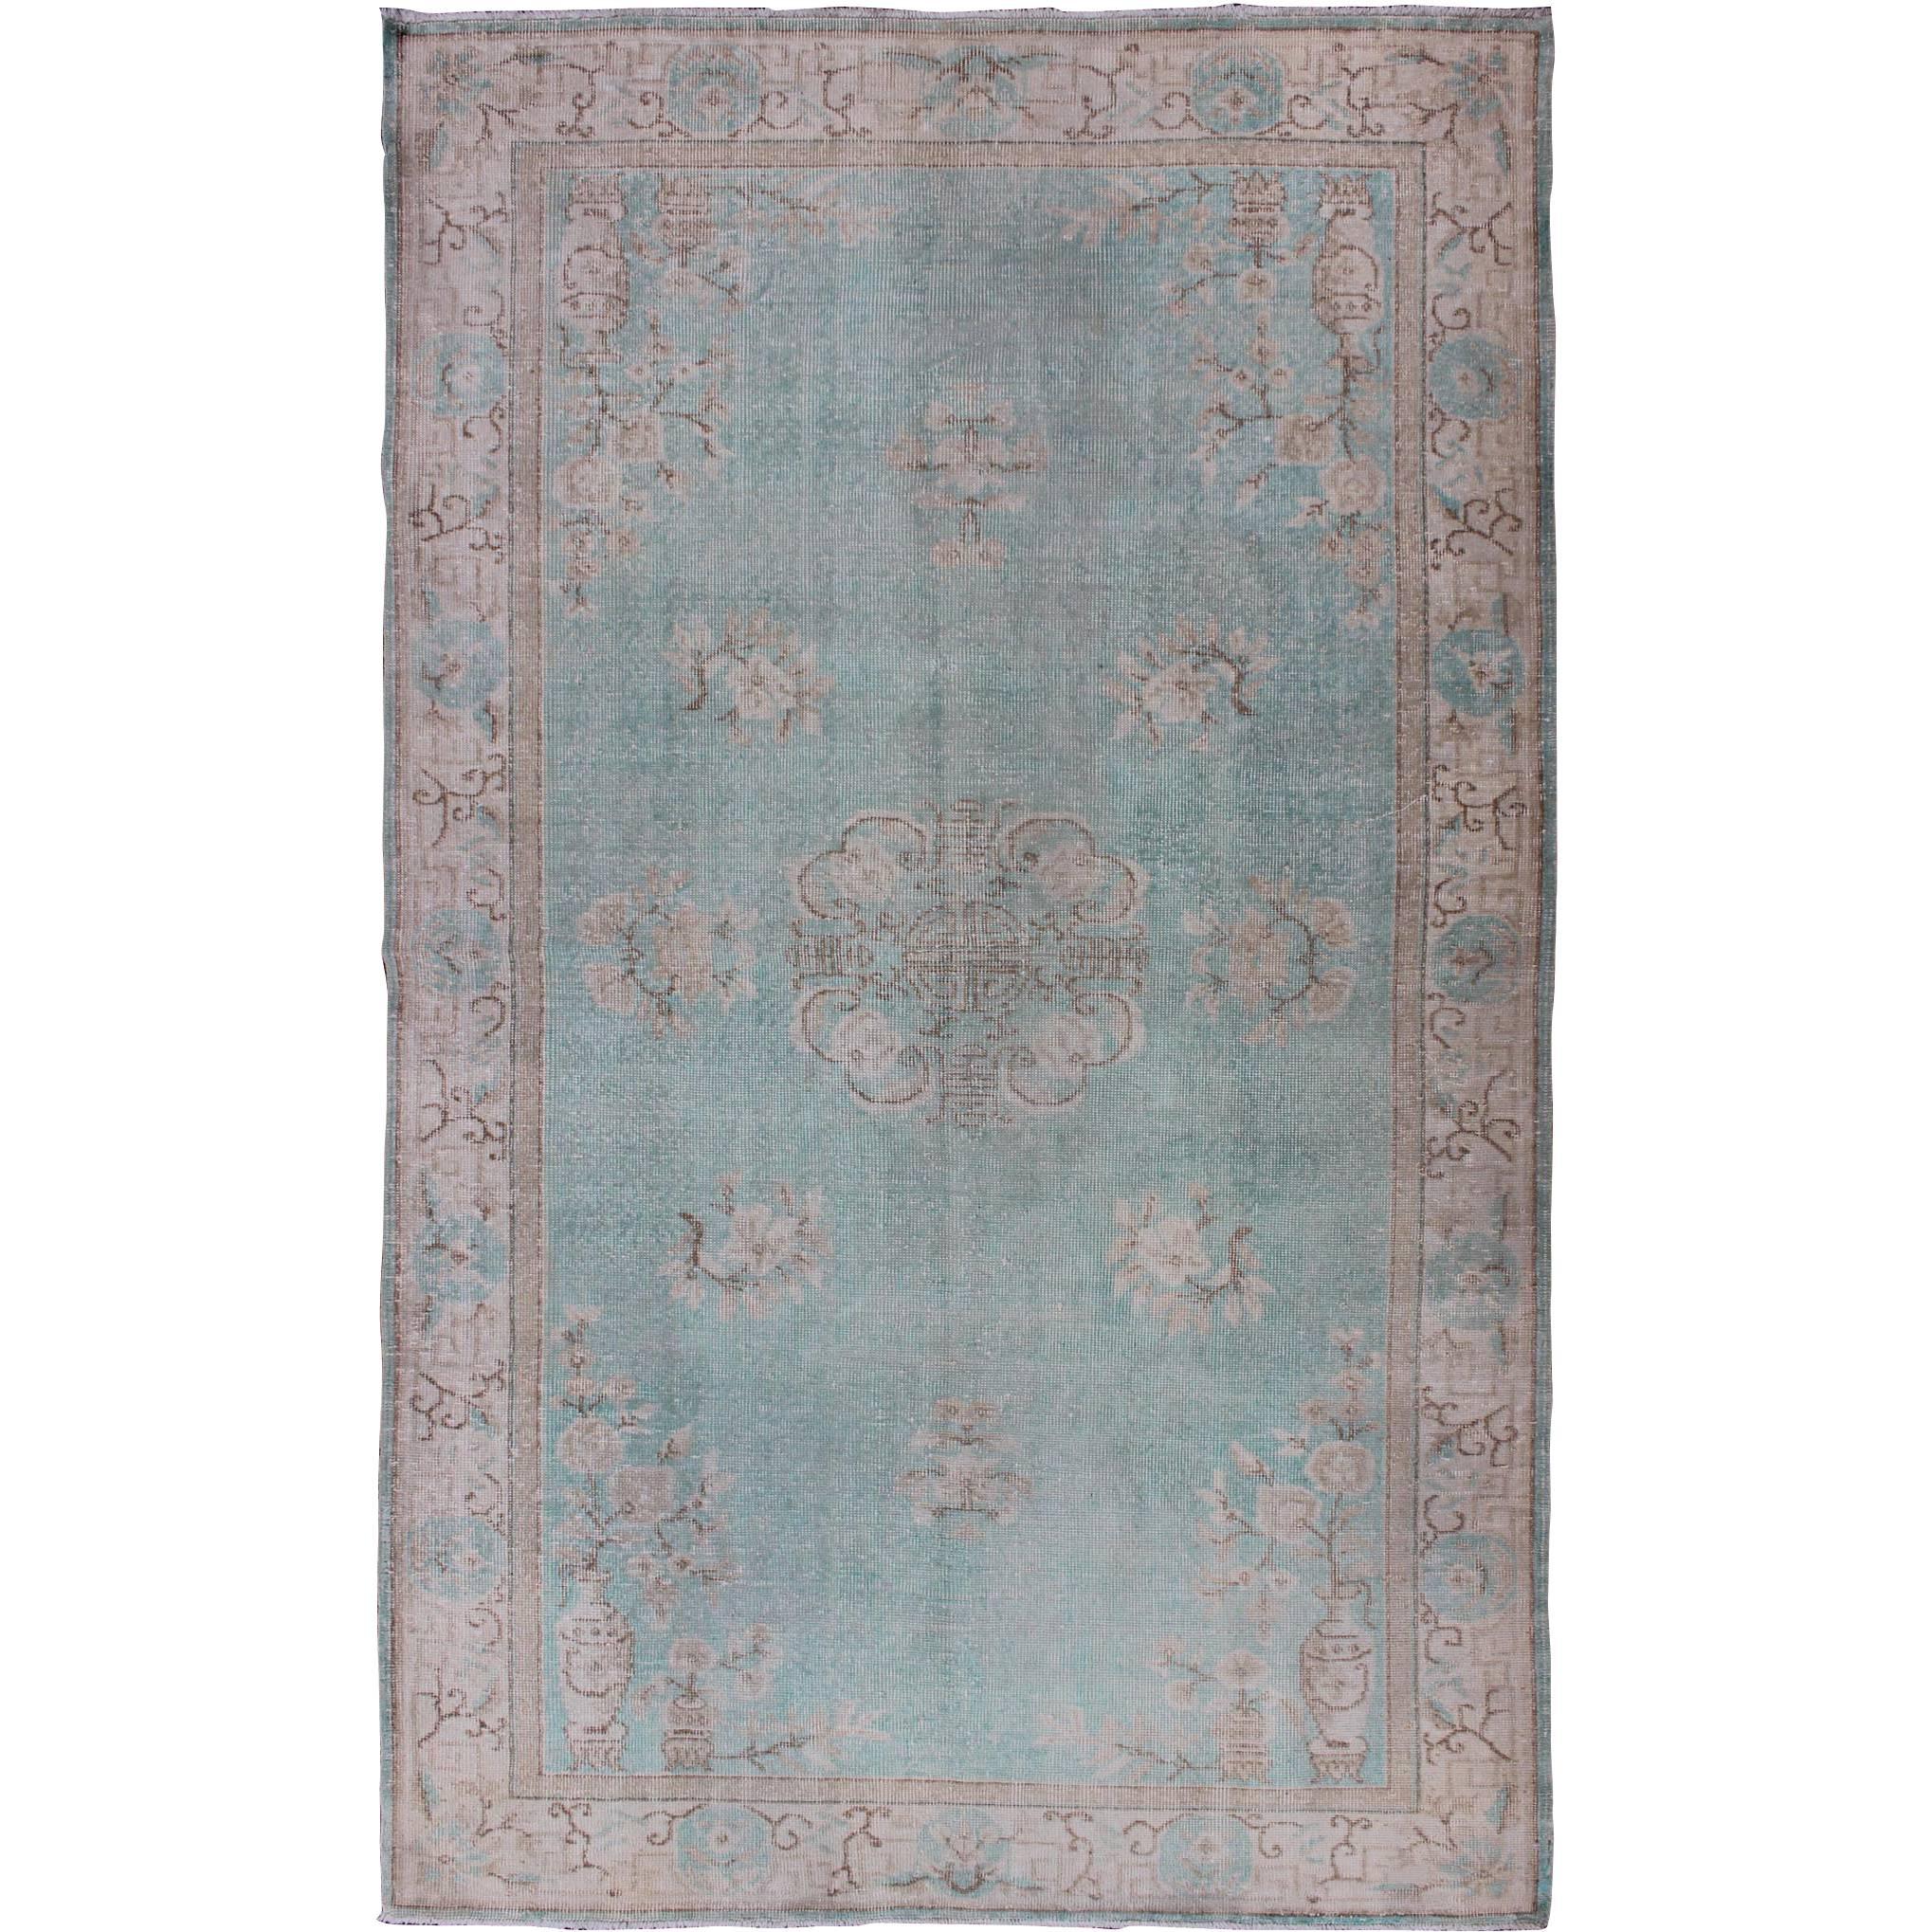 Vintage Turkish Rug with Khotan Design in Sea Foam Blue, Taupe and Light Brown For Sale